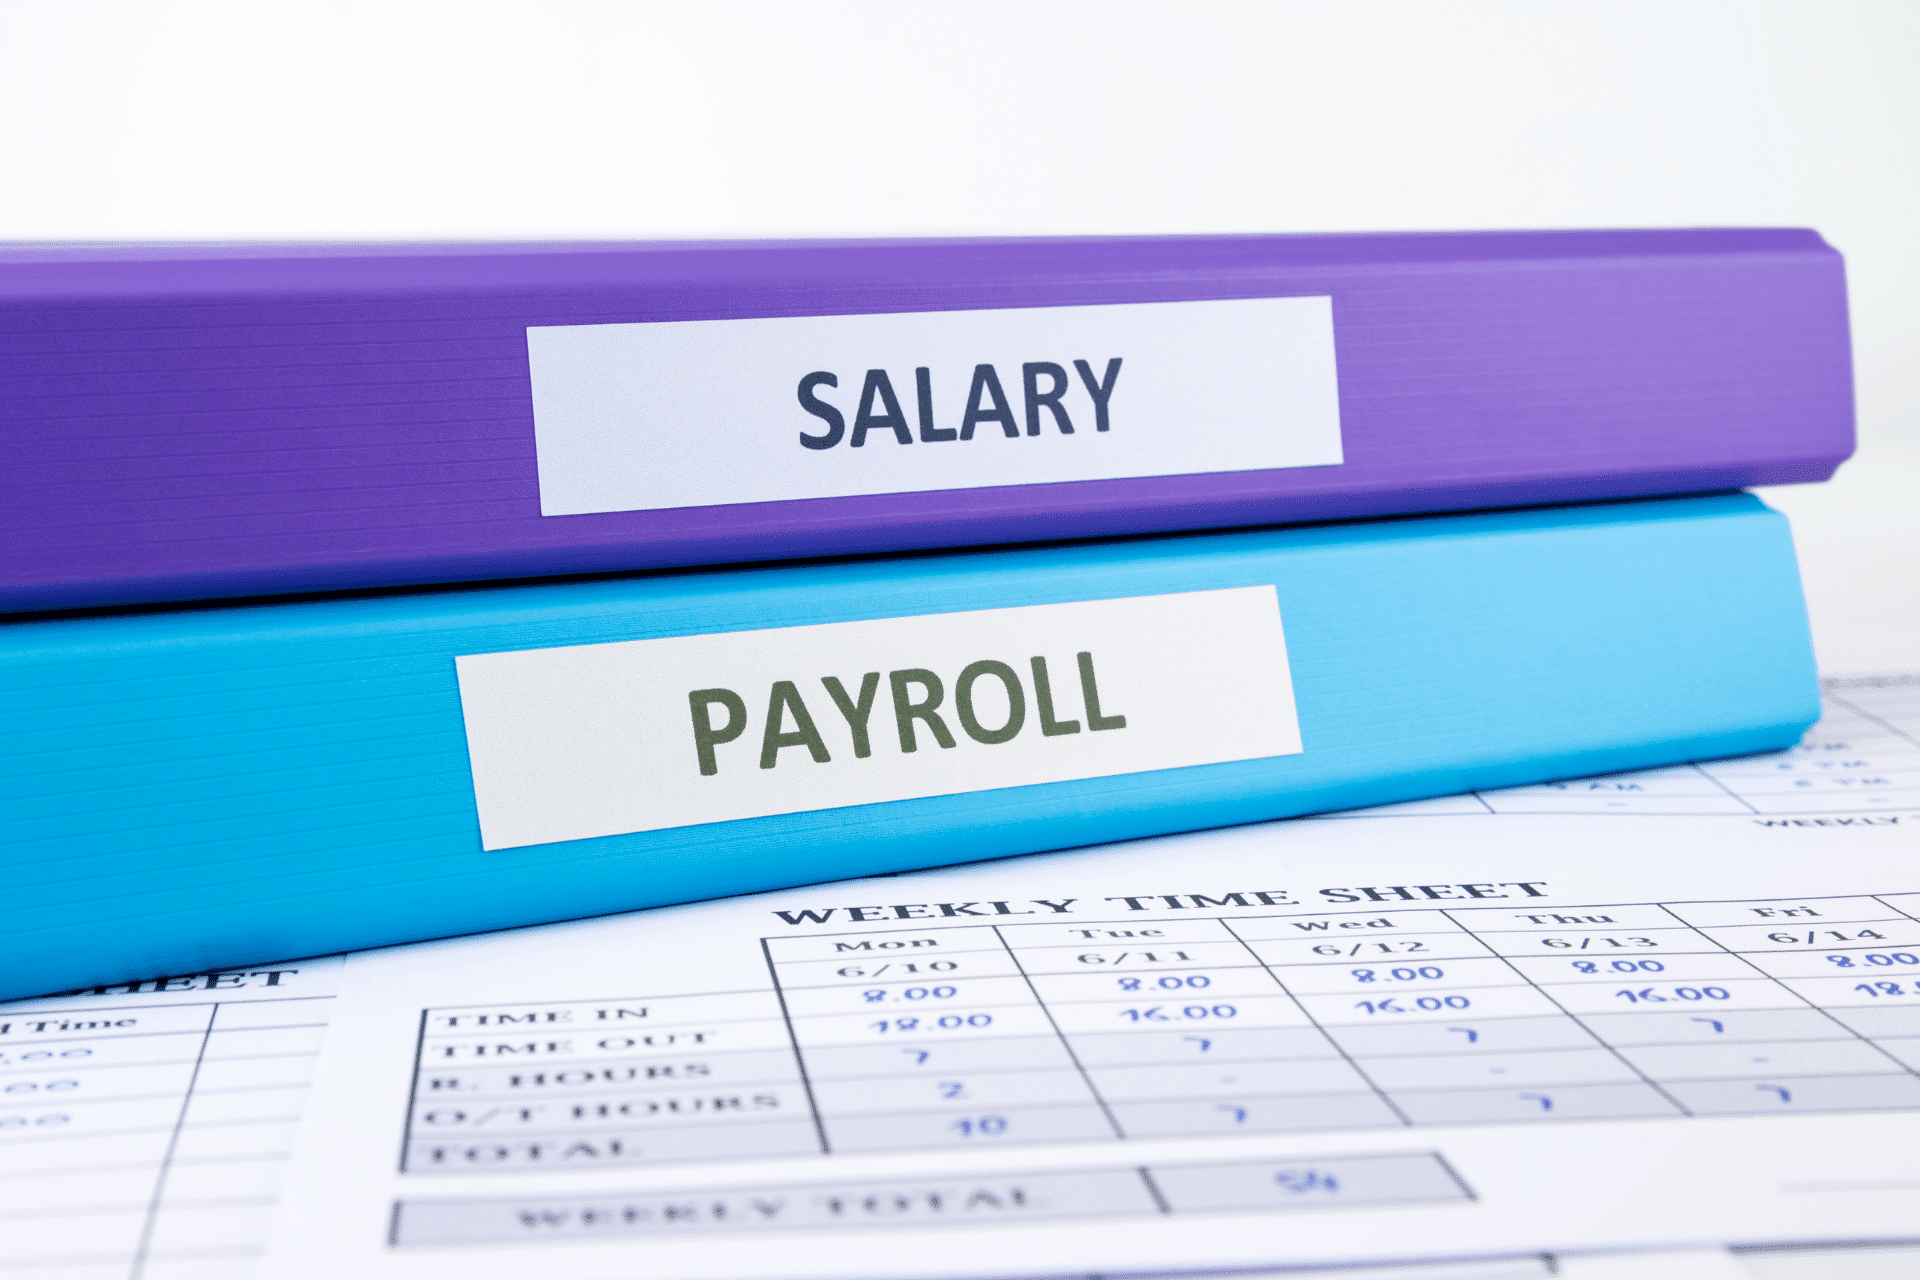 payroll and salary binders on a desk